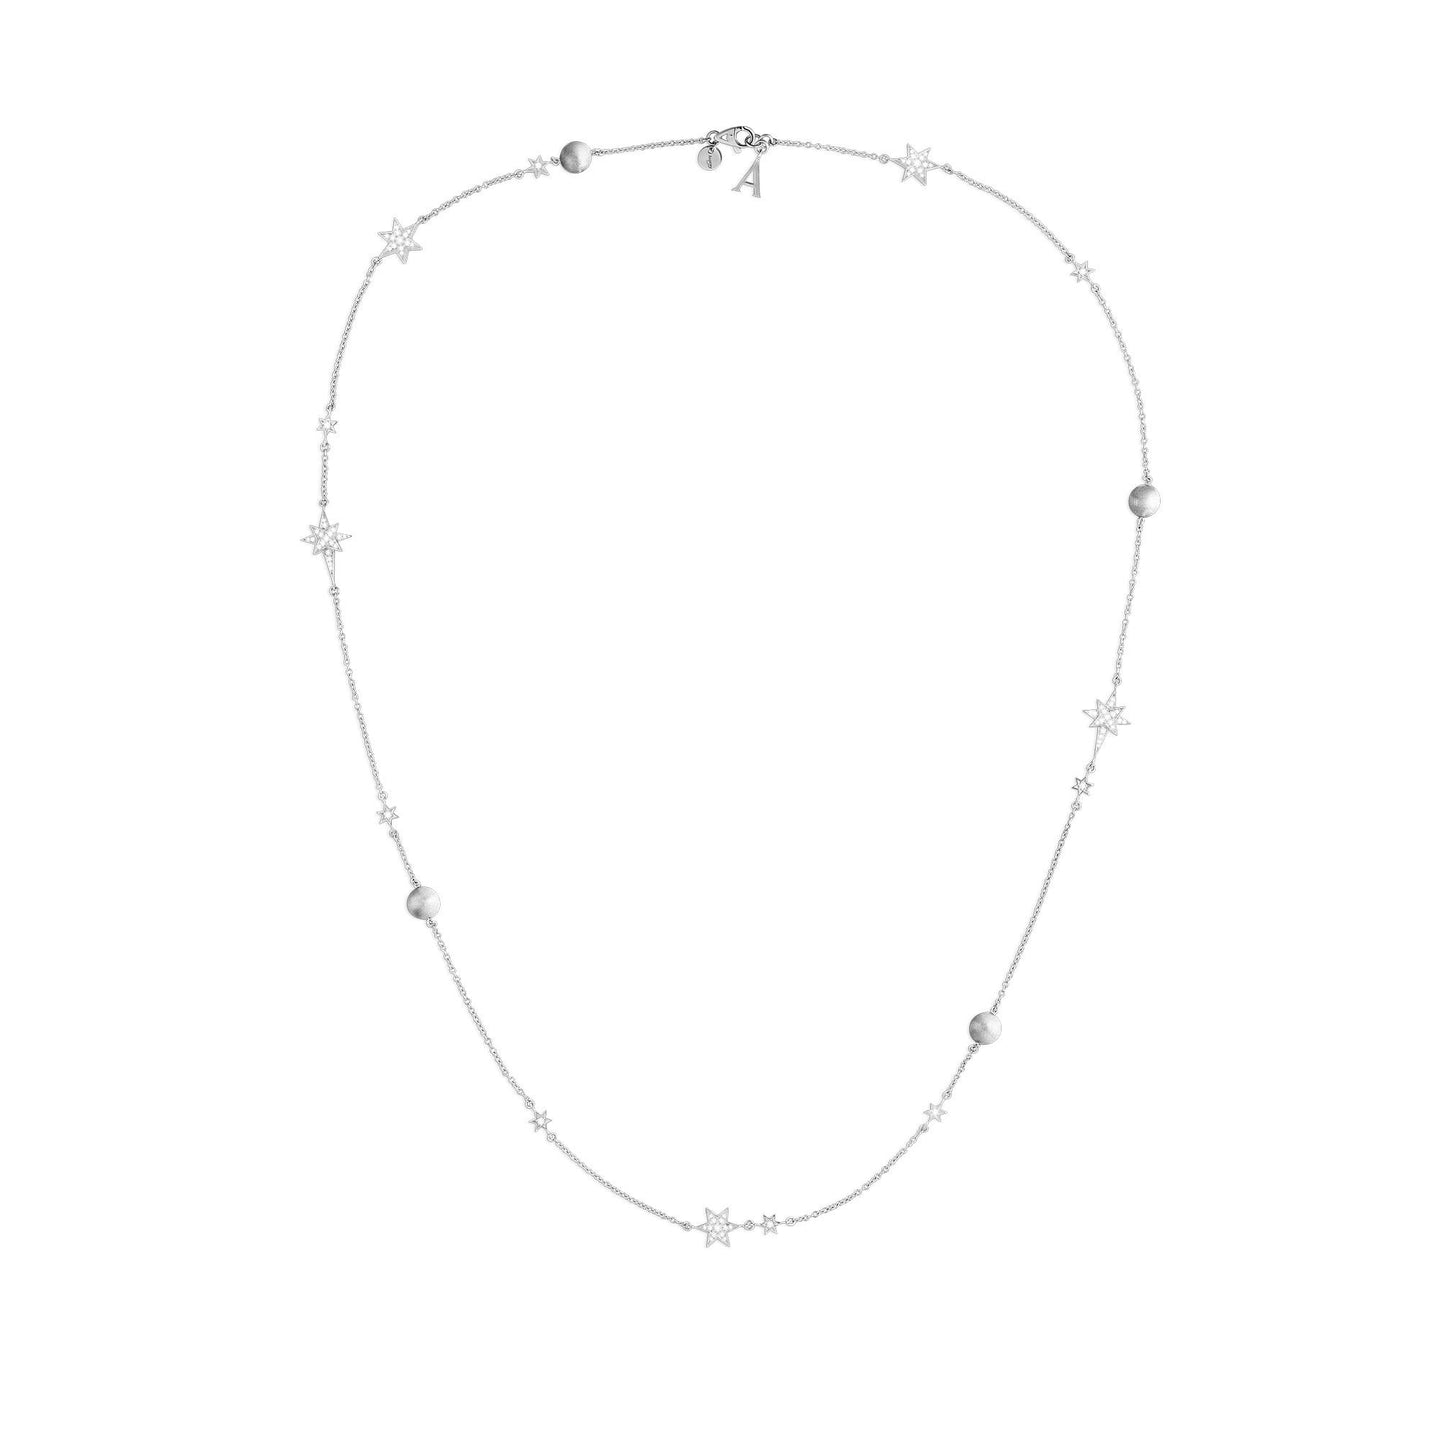 Cosmic Stargazer Necklace in 18ct White Gold with Diamonds